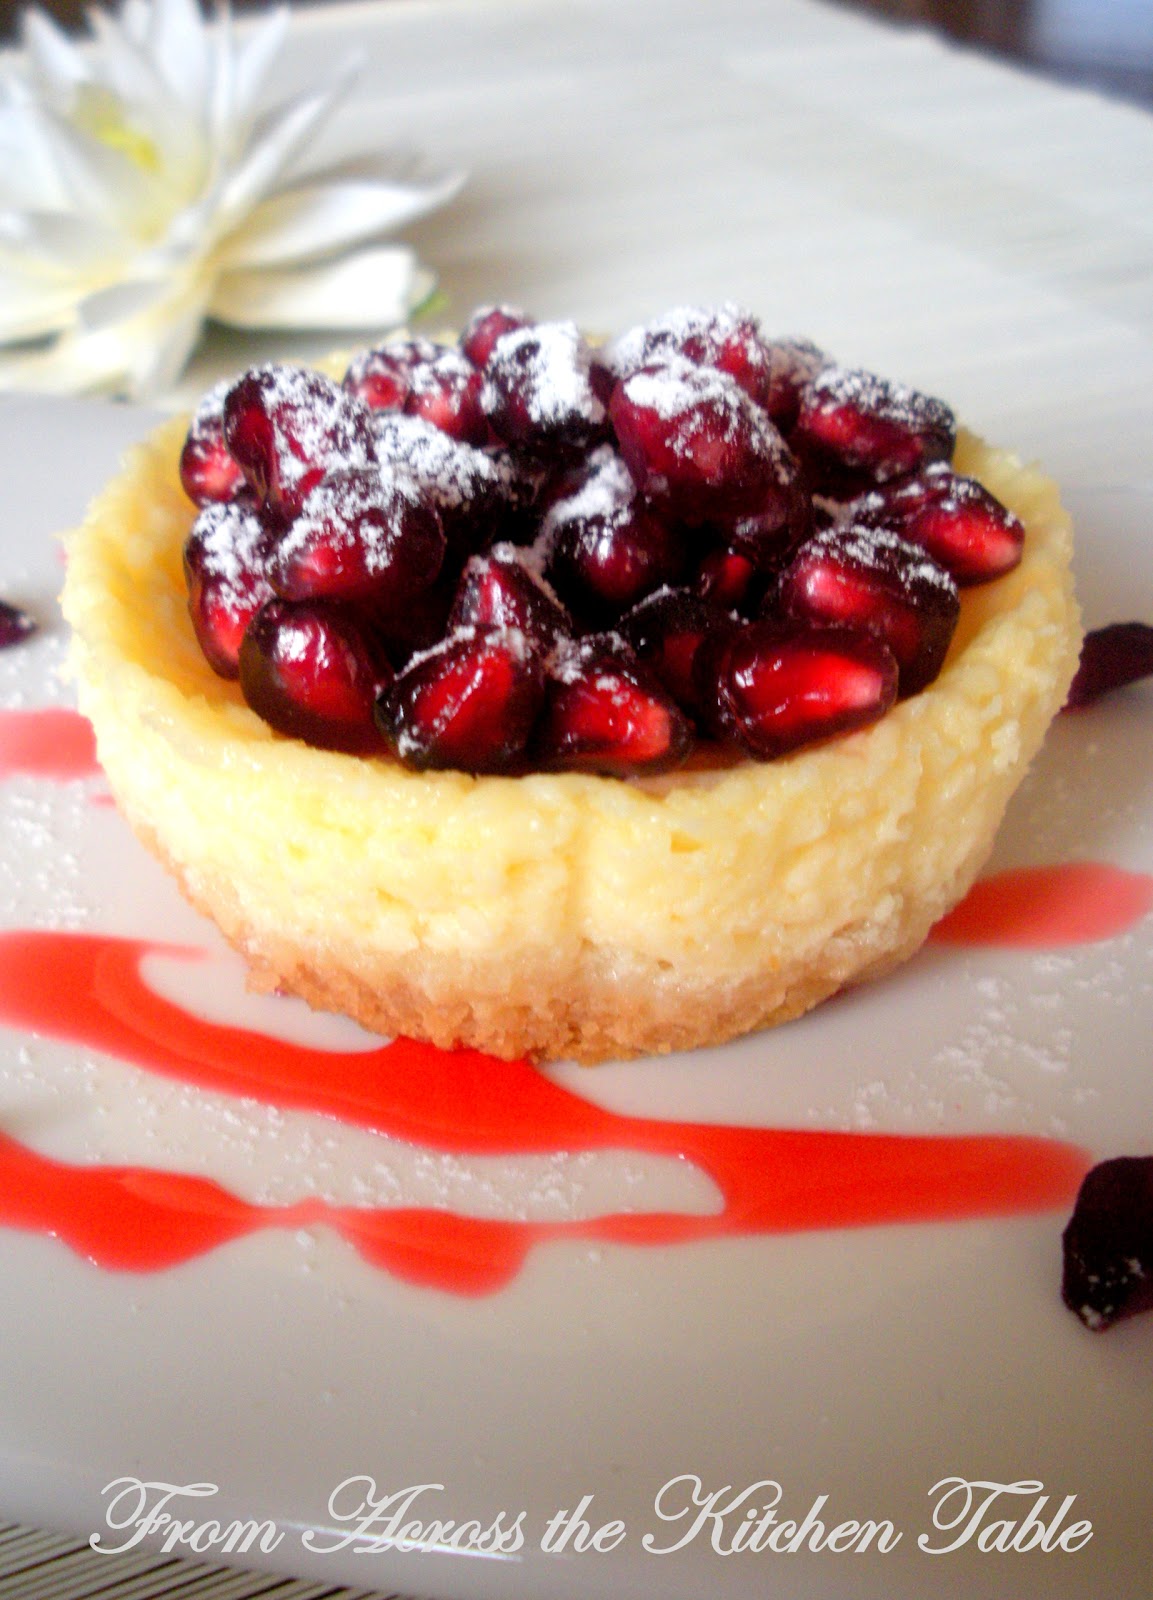 From Across the Kitchen Table: Pomegranate Cheesecake